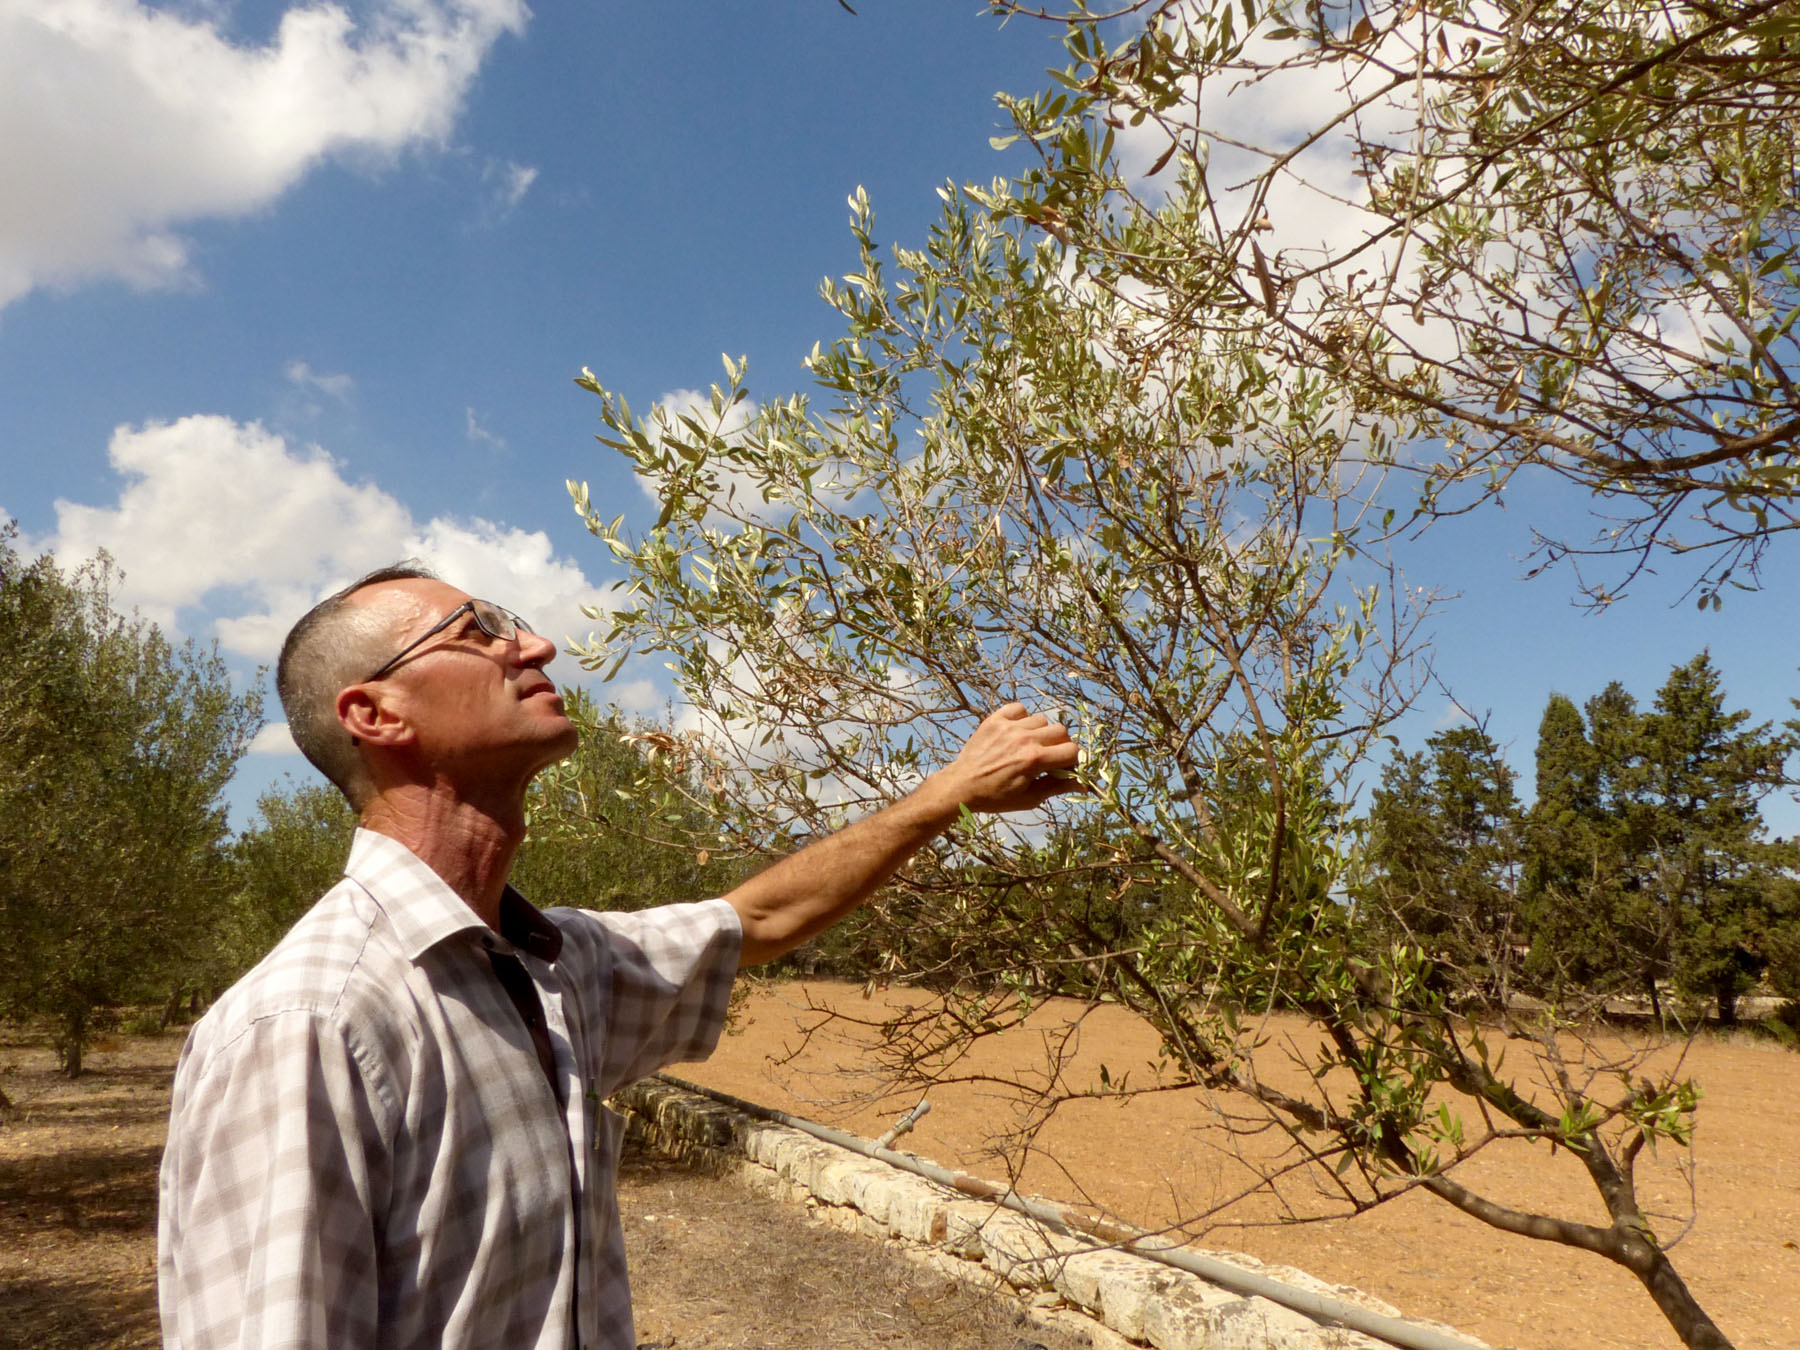 Senior Agricultural Officer Carmelo Briffa inspects a white olive tree cultivated in a government nursery of some 20 indigenous varieties. Of the island nation&rsquo;s 12,000 olive trees today, only 70 are white olive trees.